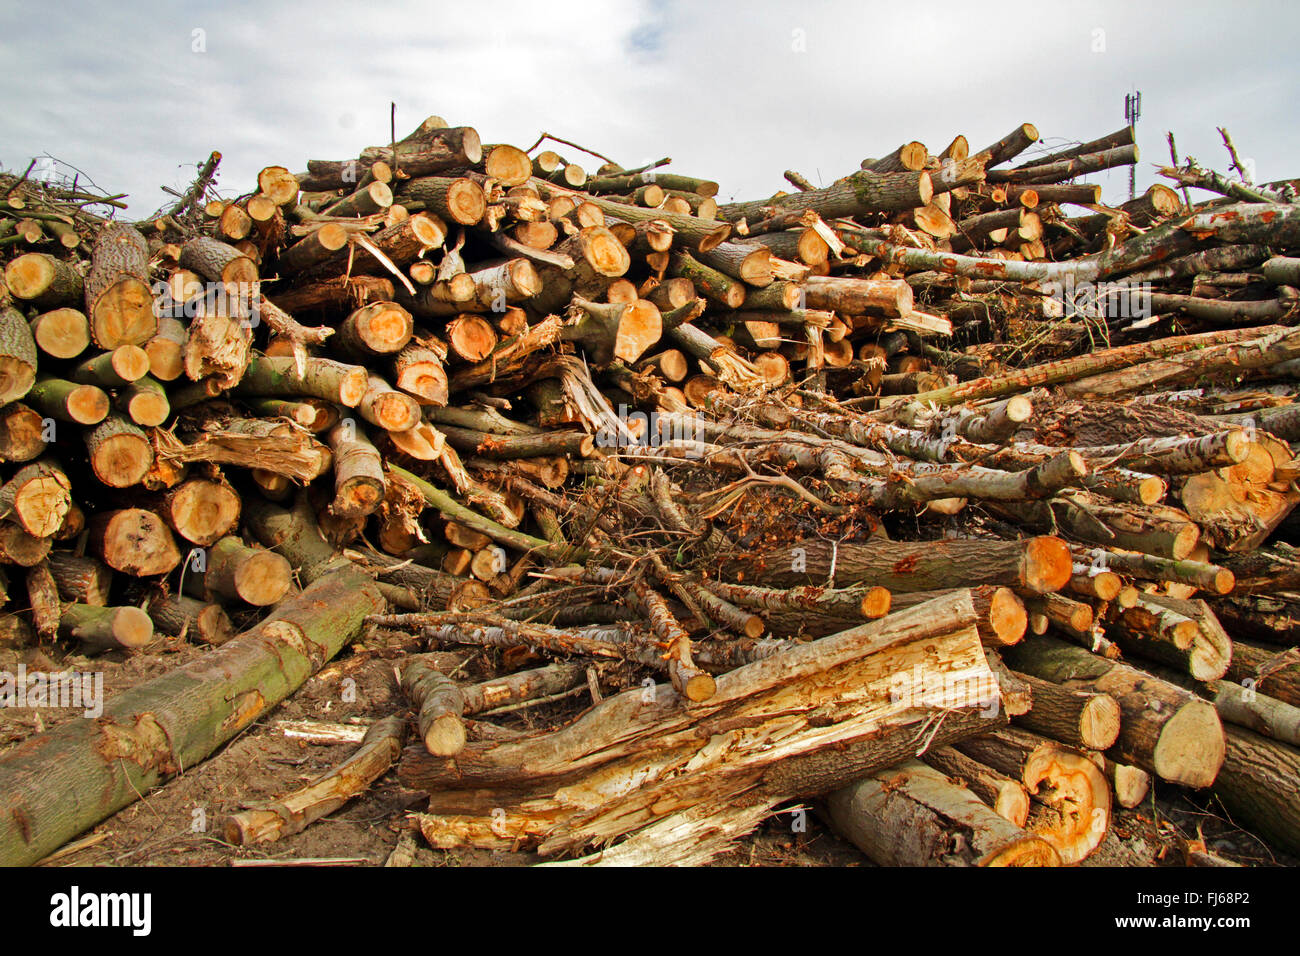 timber storage after deforestation, Germany Stock Photo